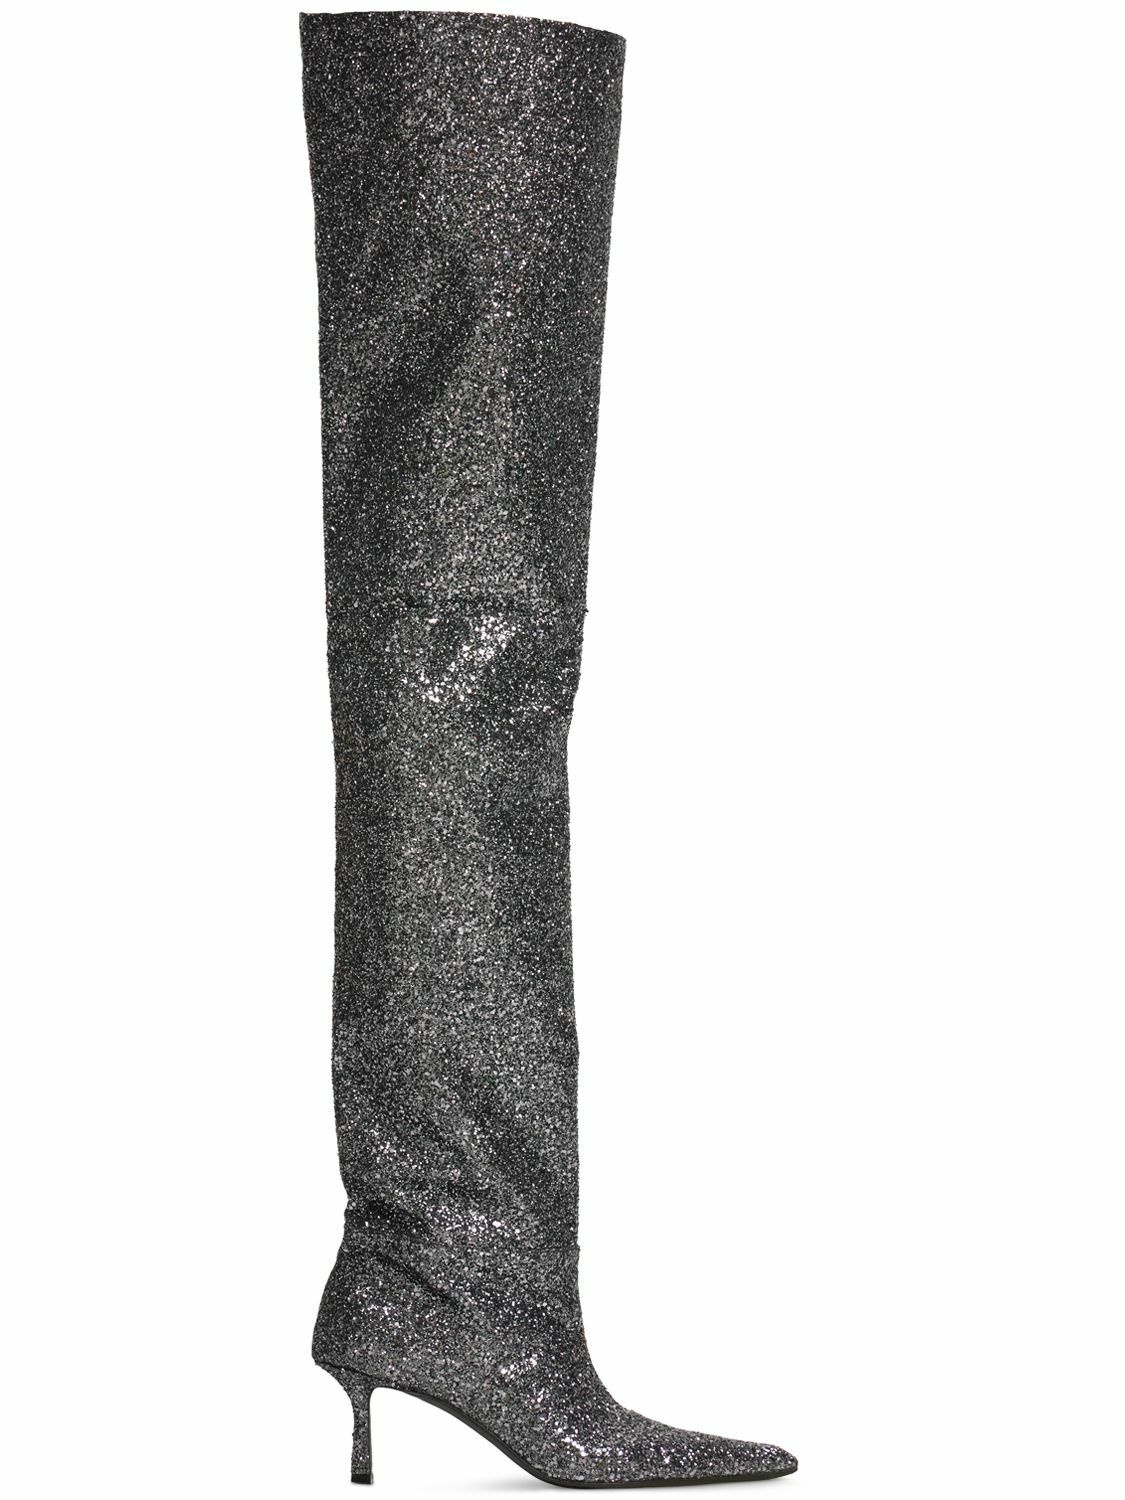 Photo: ALEXANDER WANG - 65mm Viola Glittered Over-the-knee Boots